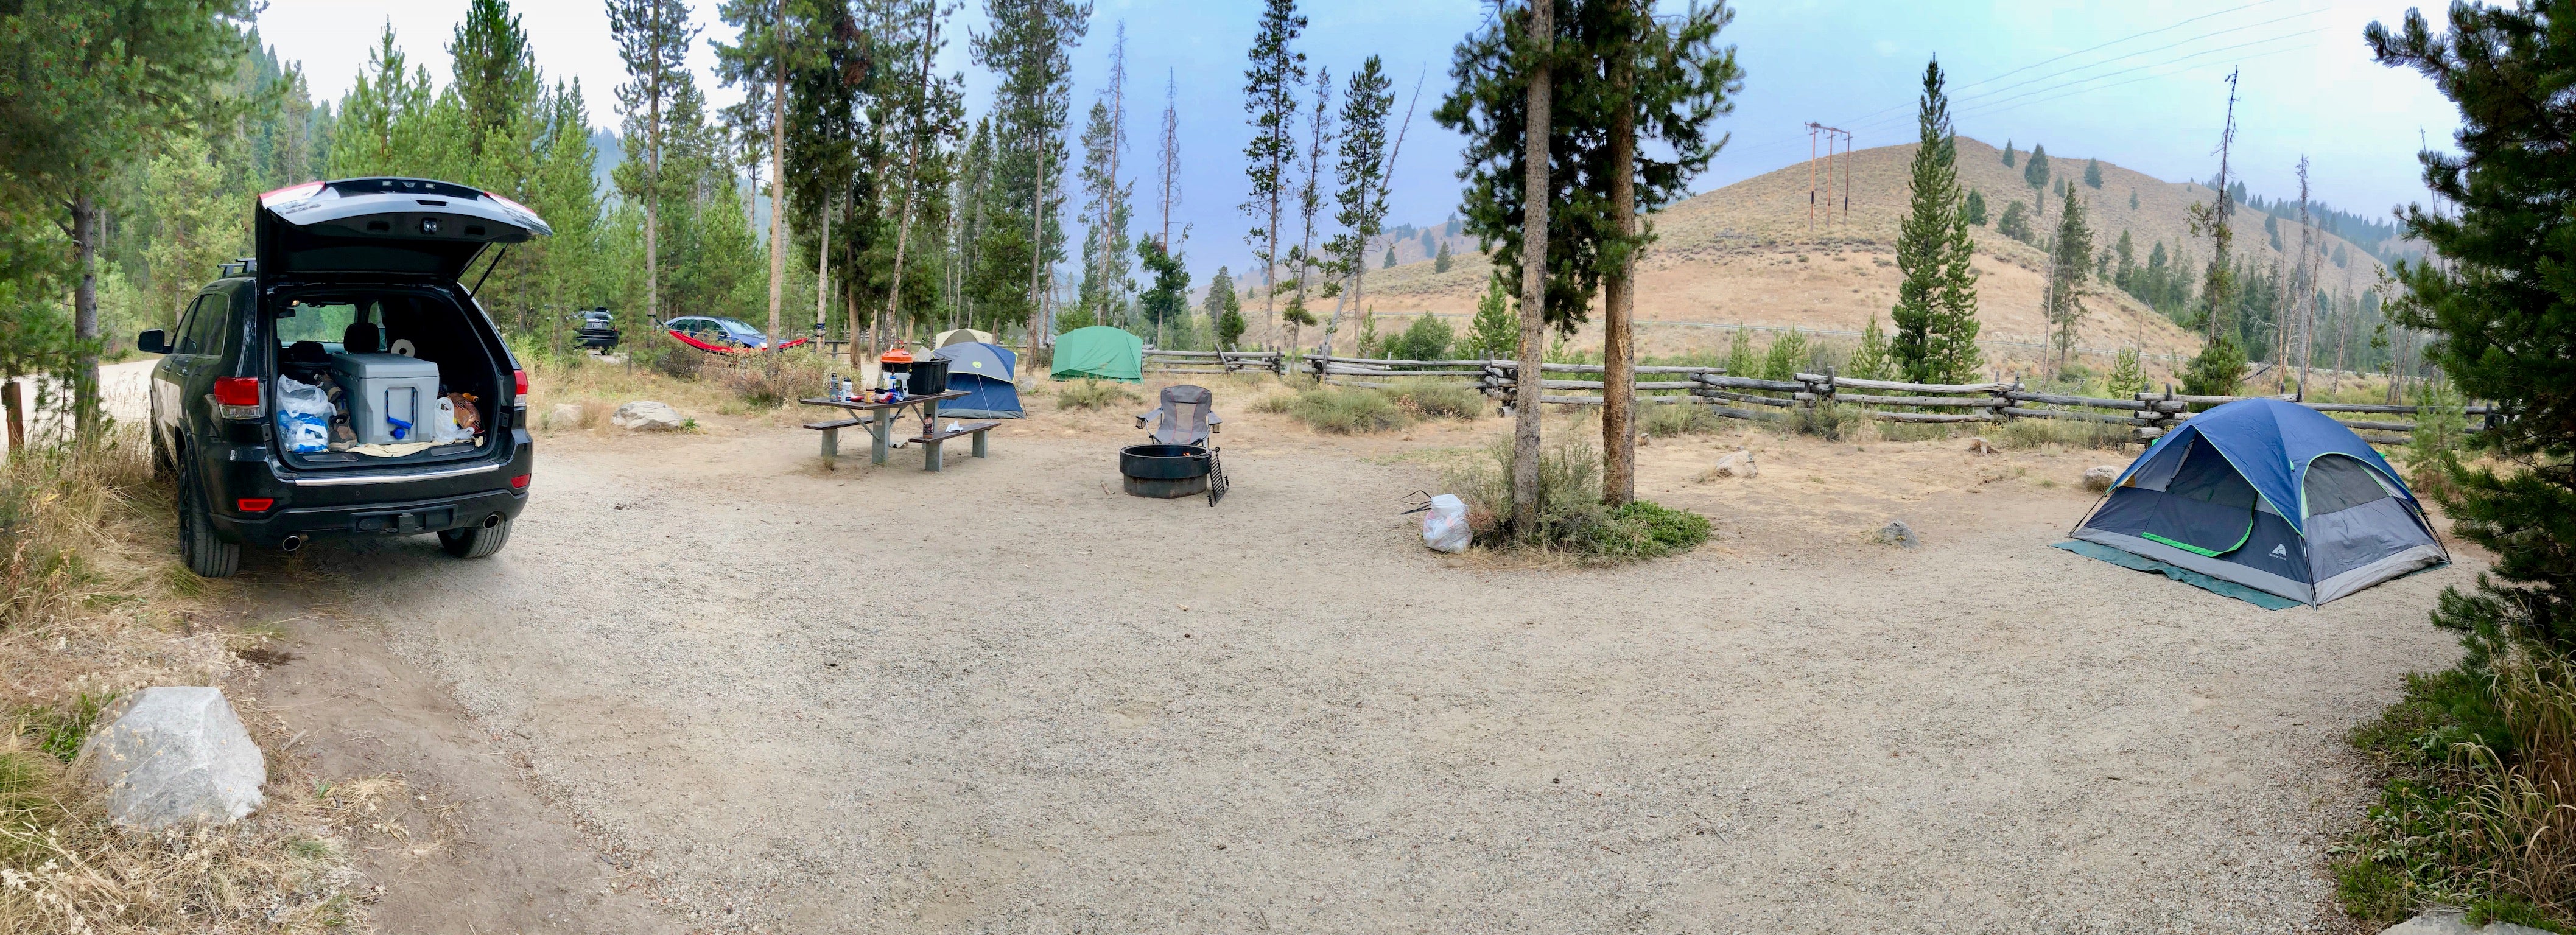 Camper submitted image from Casino Creek Campground - 3